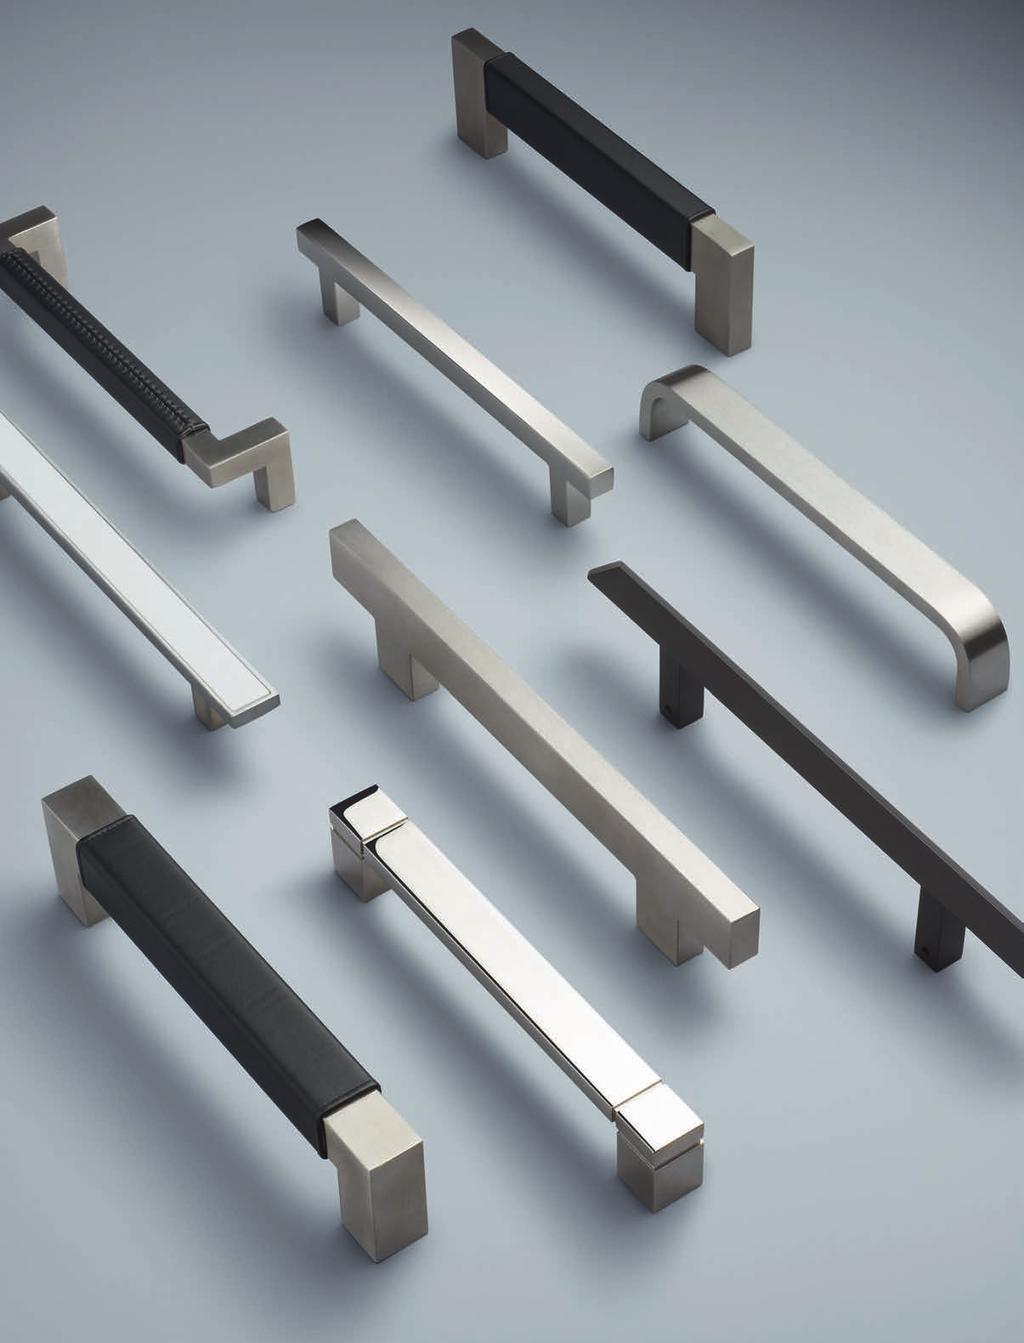 s q u a r e g r i p Clean lines and bold styling fuse to create these sturdy pulls.